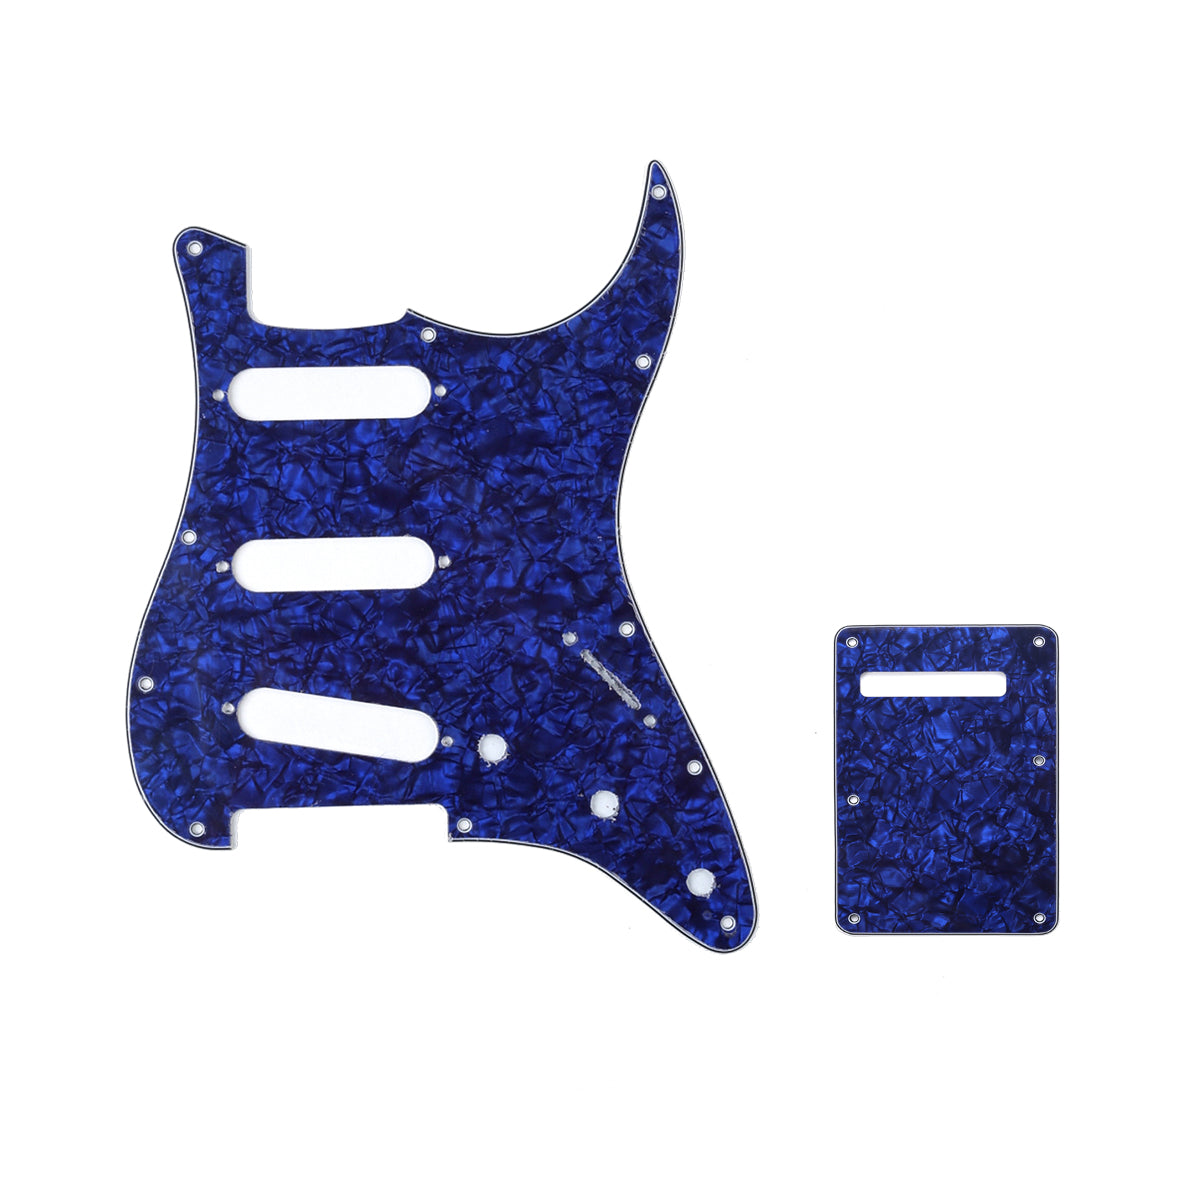 Musiclily SSS 11 Hole Strat Guitar Pickguard and BackPlate Set for Fender USA/Mexican Standard Stratocaster Modern Style, 4Ply Blue Pearl